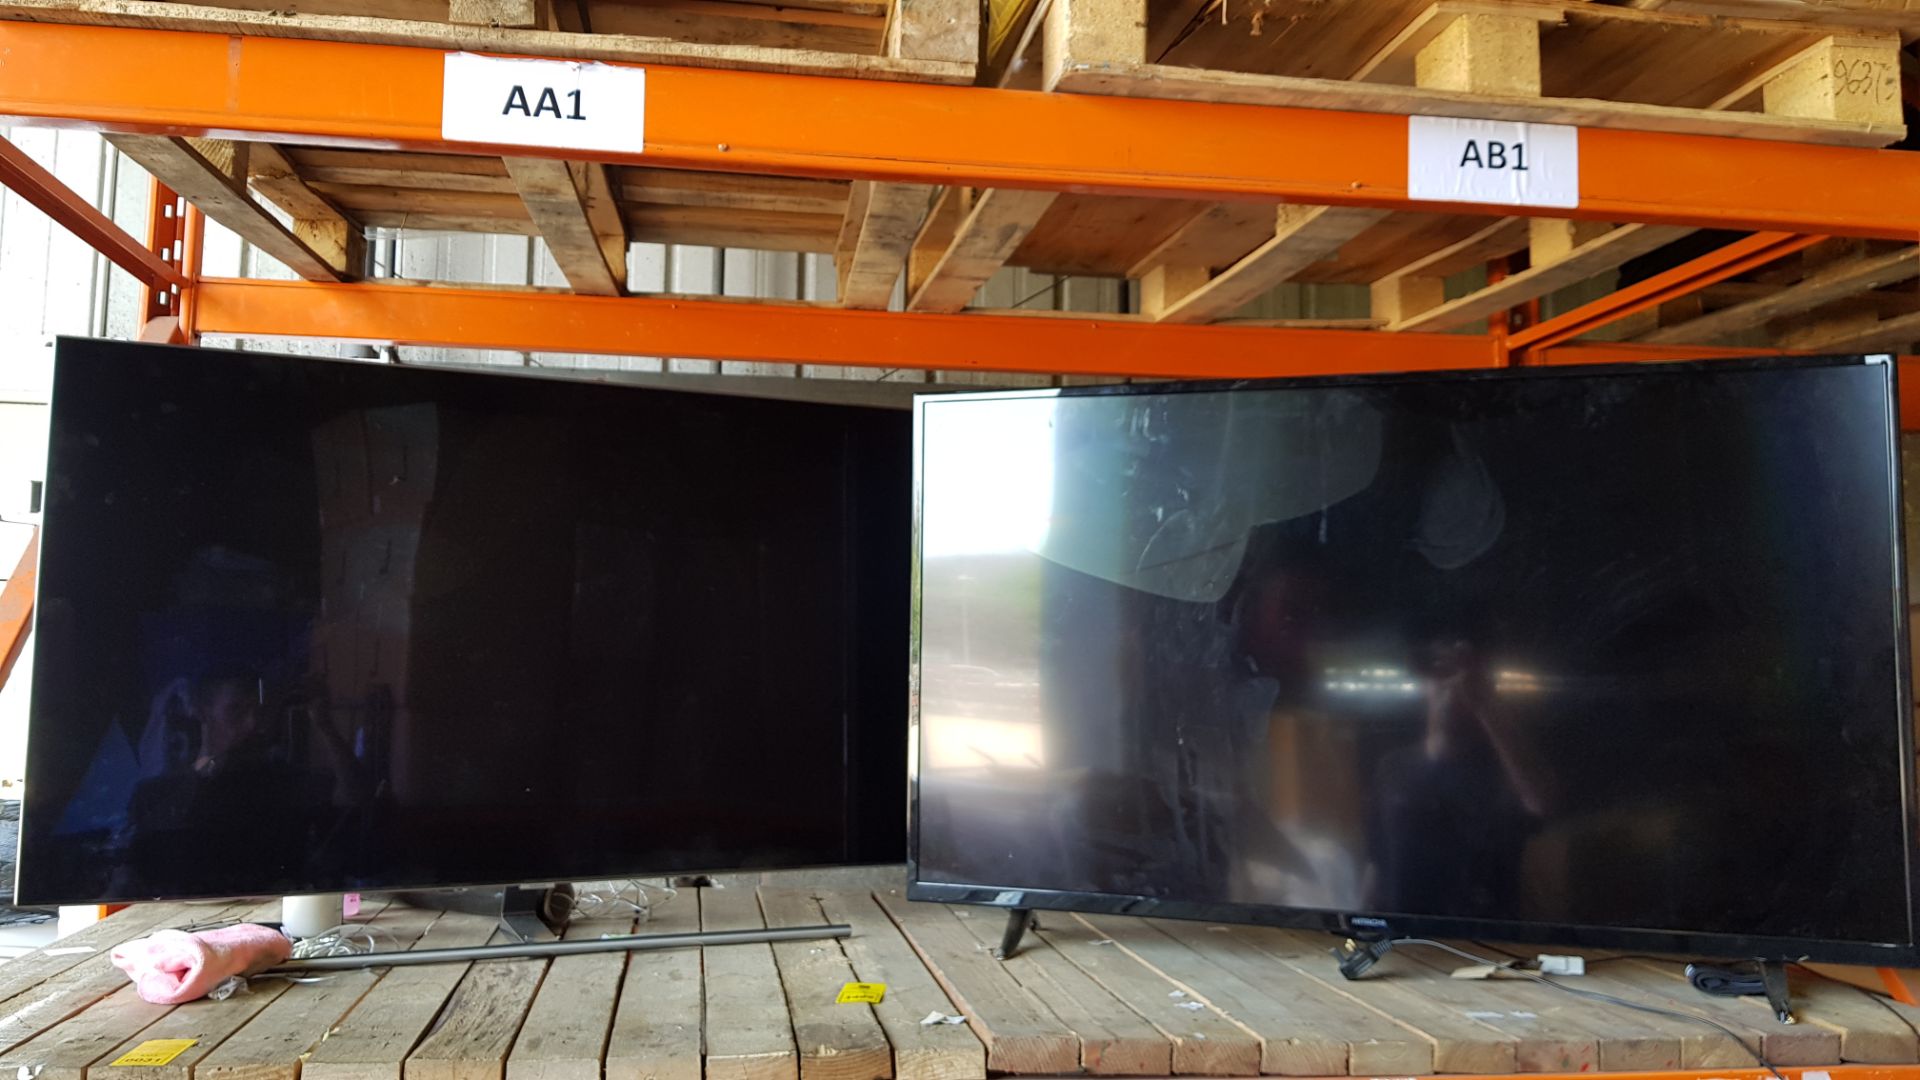 2 PIECE TV LOT CONTAINING 1 X HITACHI 55 AND 1 X 55 SAMSUNG TV (PLEASE NOTE BOTH TVS HAVE CRACKED